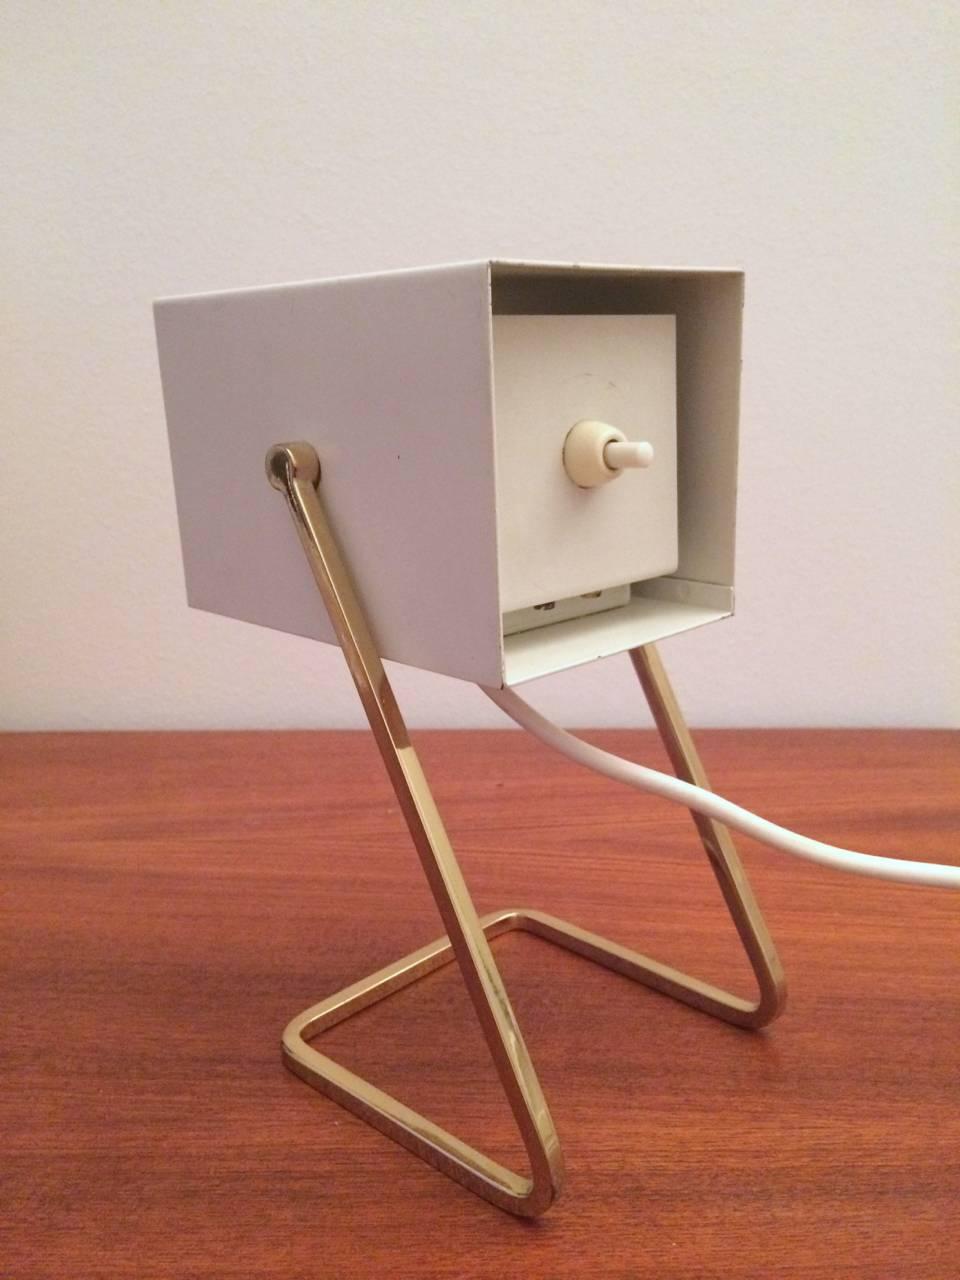 Lacquered Mid-Century German Desk Lamp in Brass and White Cube from Kaiser Leuchten, 1960 For Sale